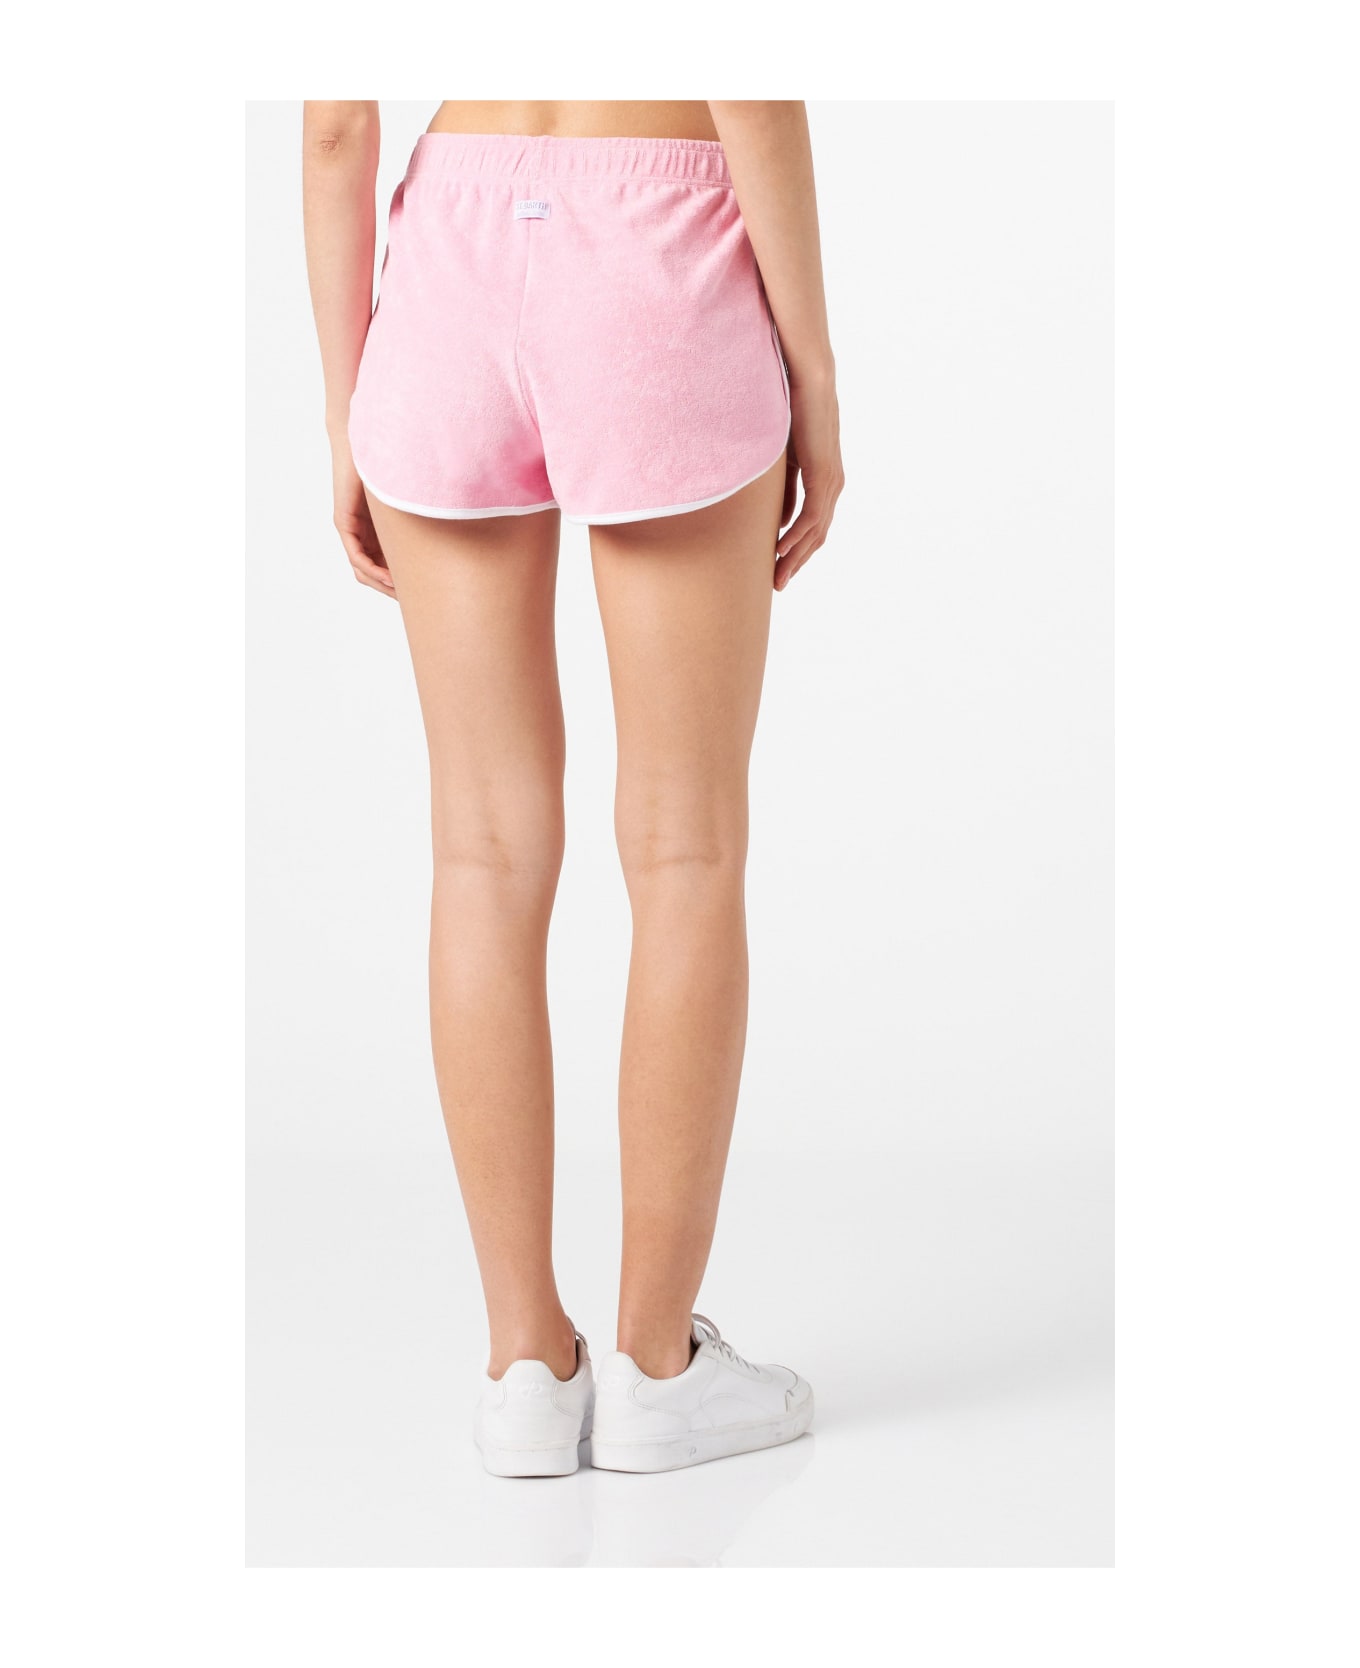 MC2 Saint Barth Woman Pink Terry Shorts With Piping | Melissa Satta Special Edition - PINK